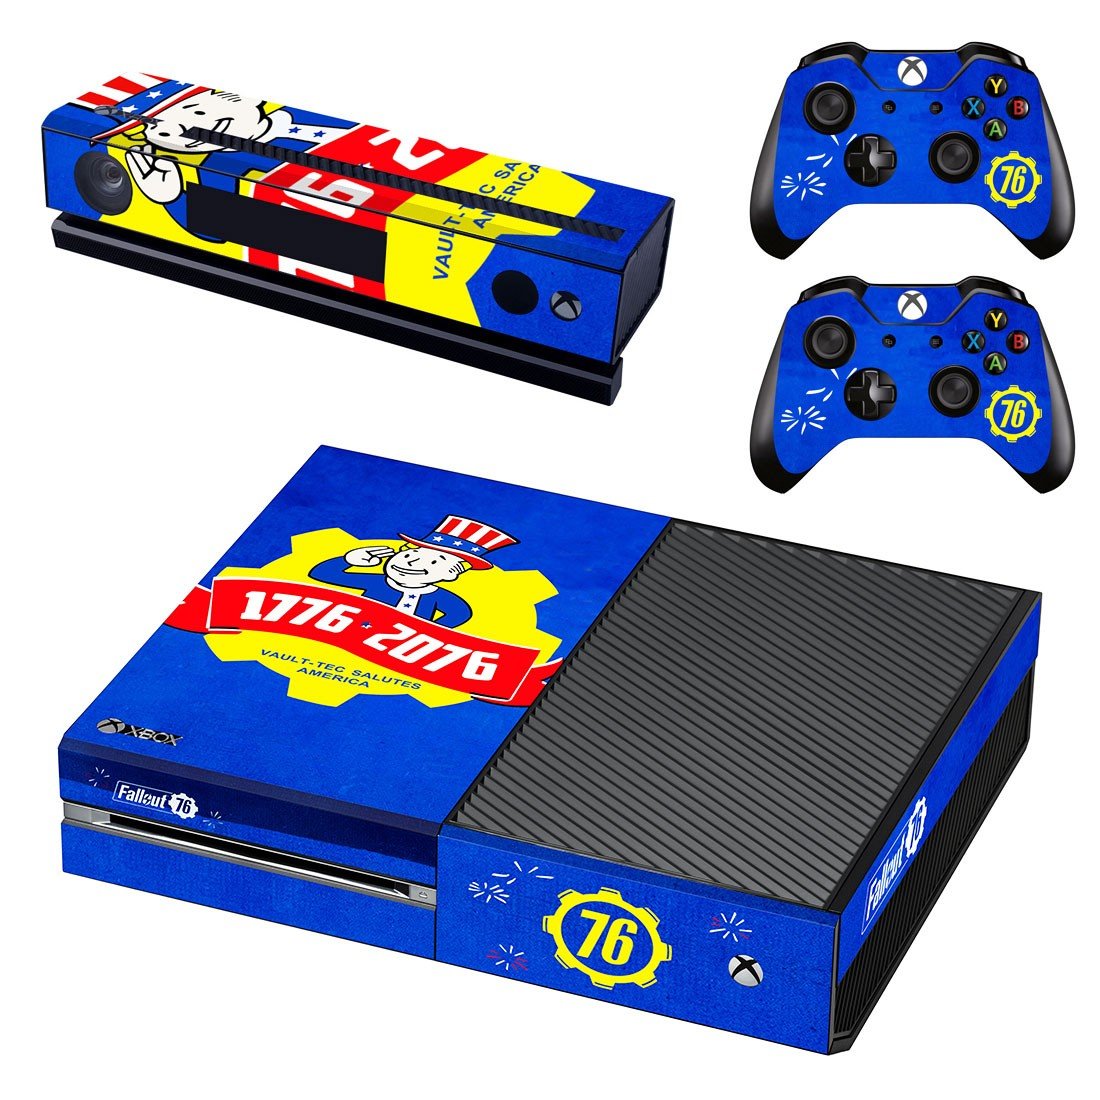 Fallout 76 Sticker For Xbox One And Controllers